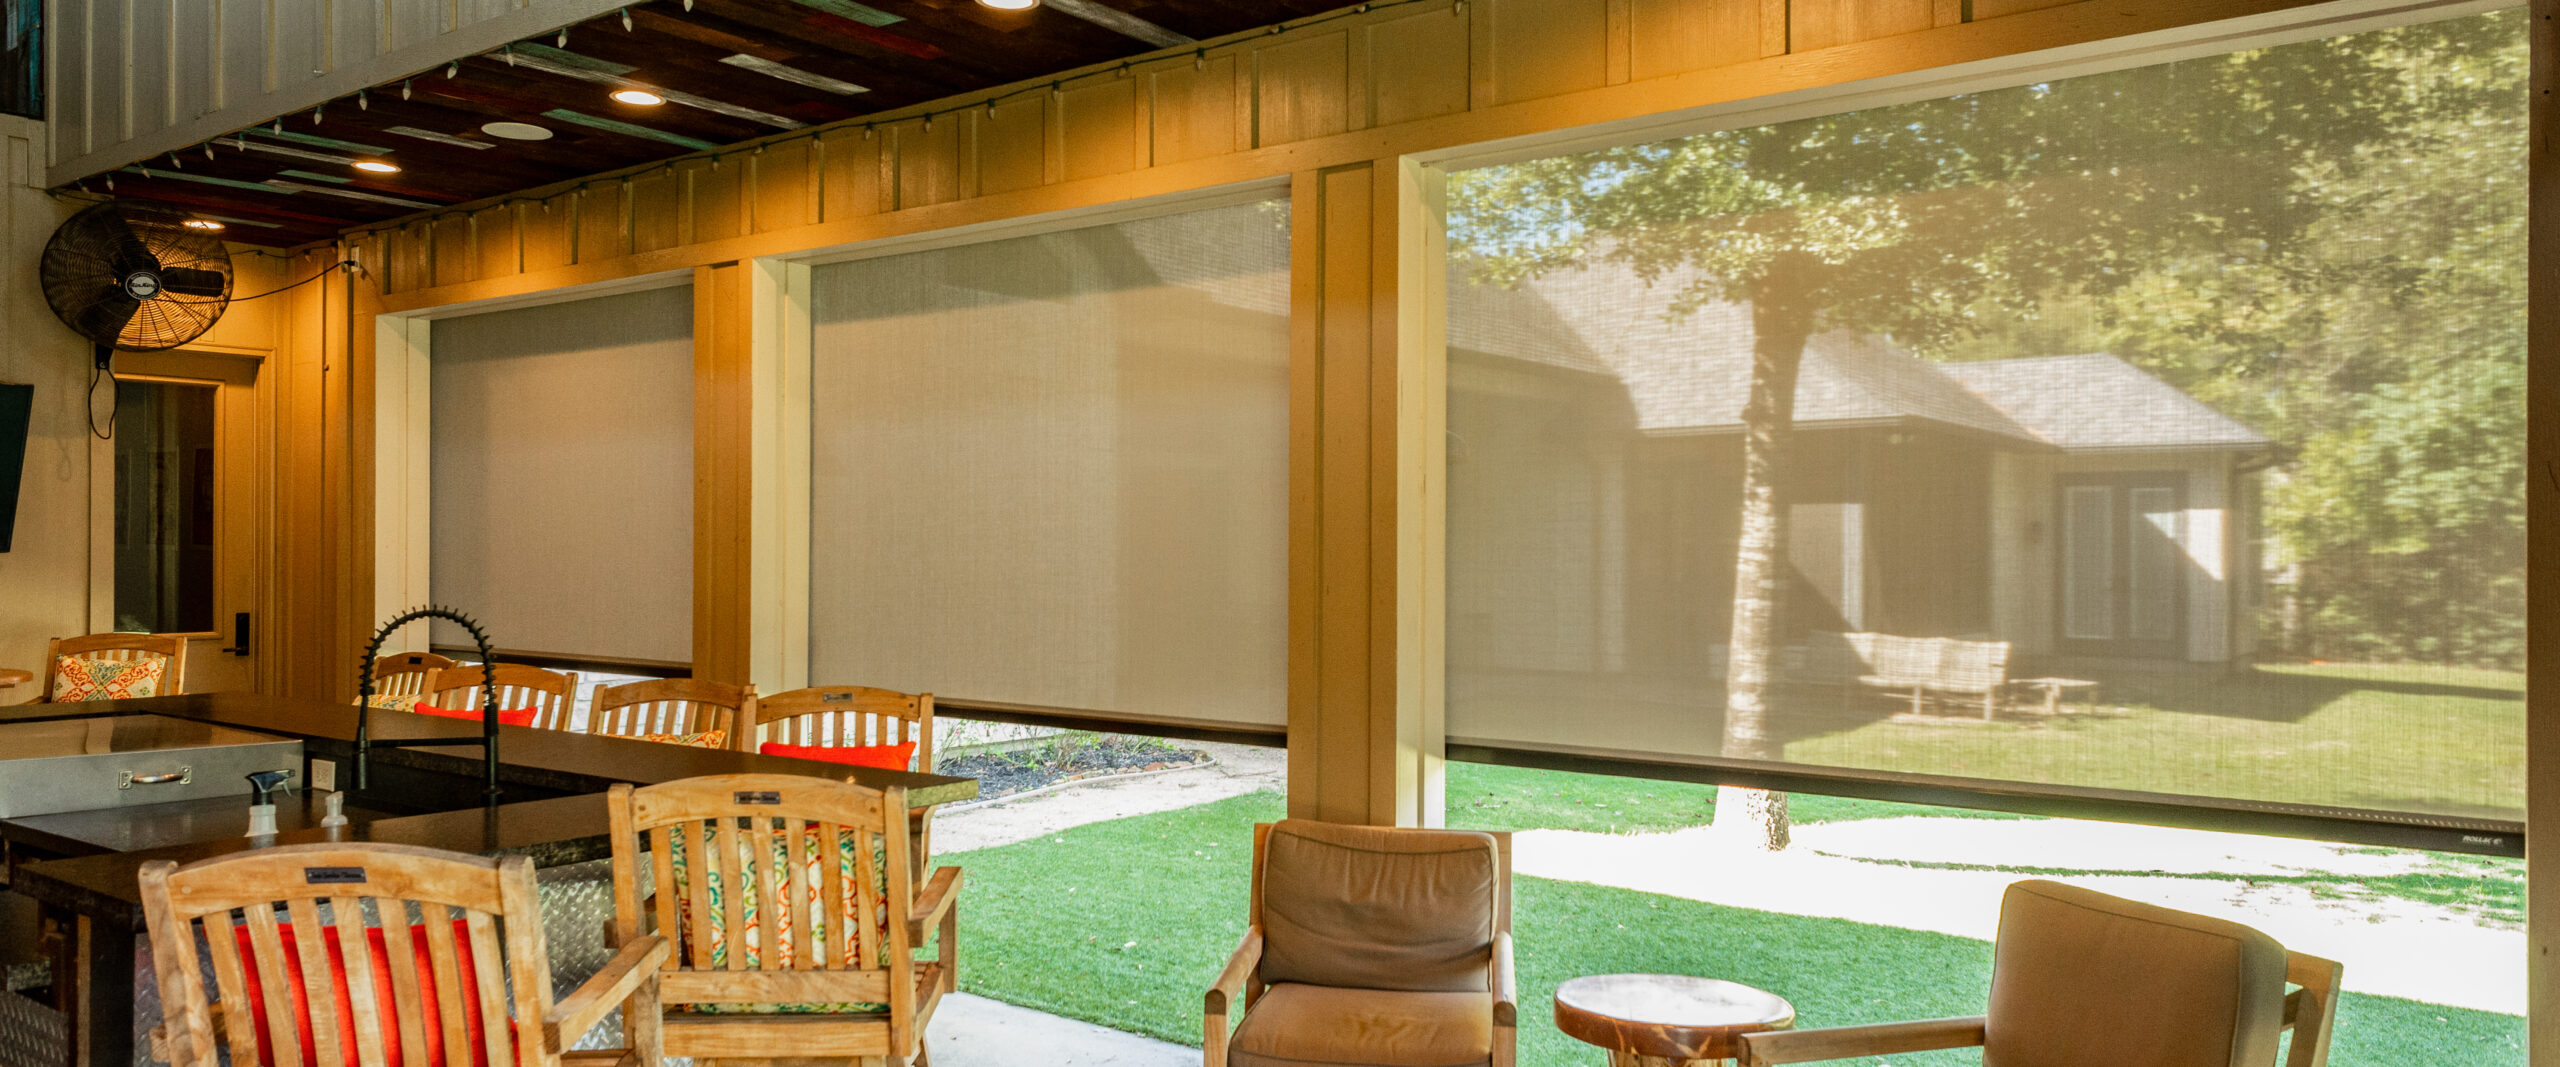 Interior View of Retractable Screens at a Home Patio